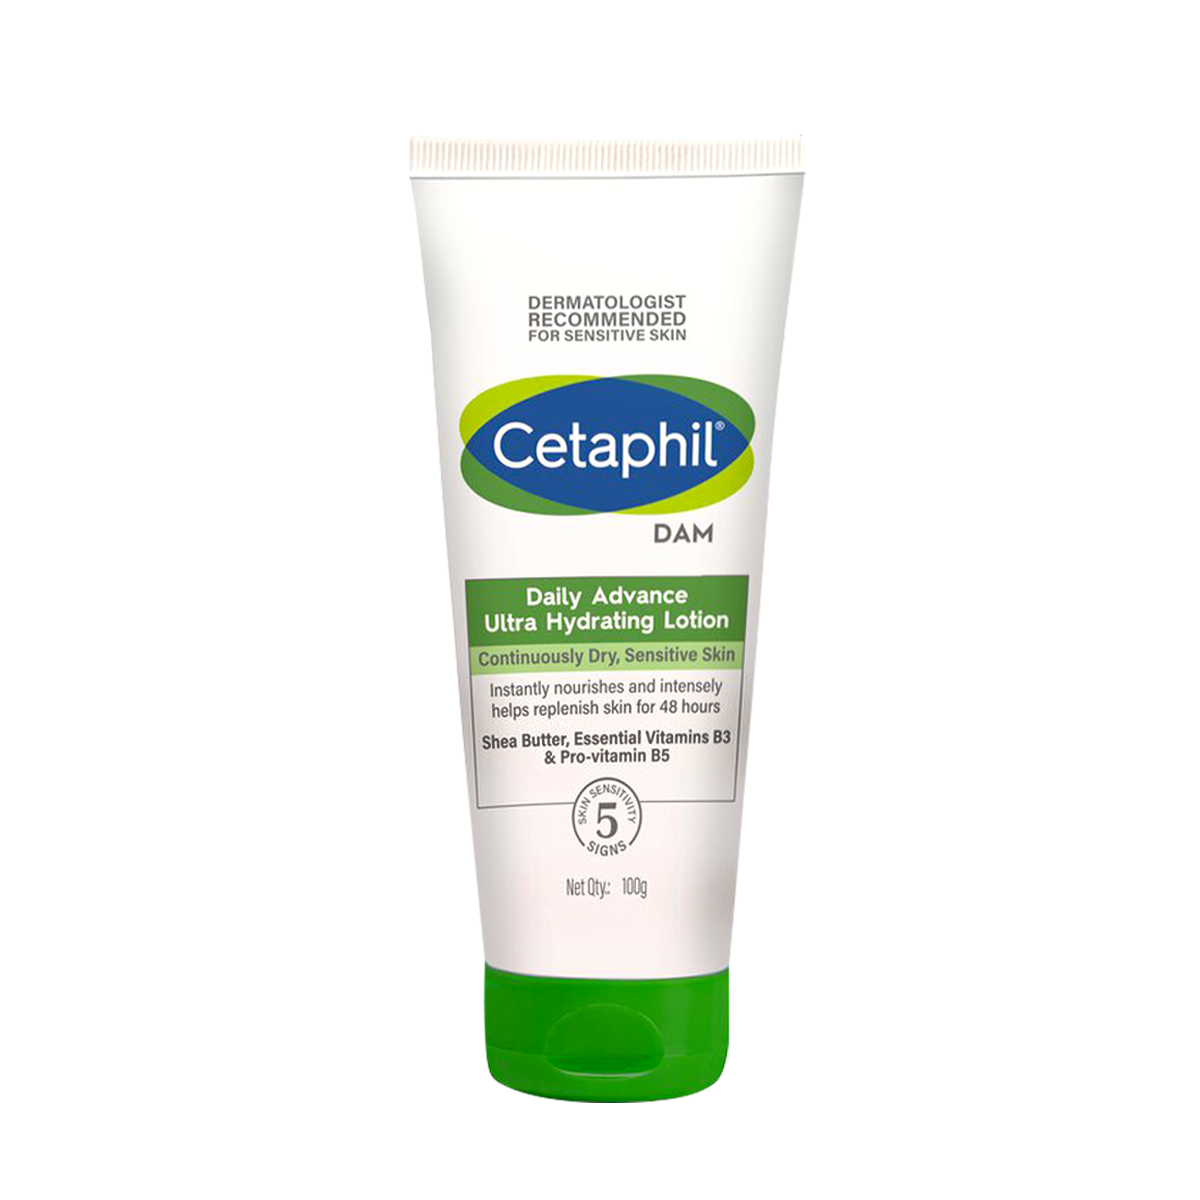 First product image of Cetaphil DAM Daily Advance Hydrating Lotion 100g